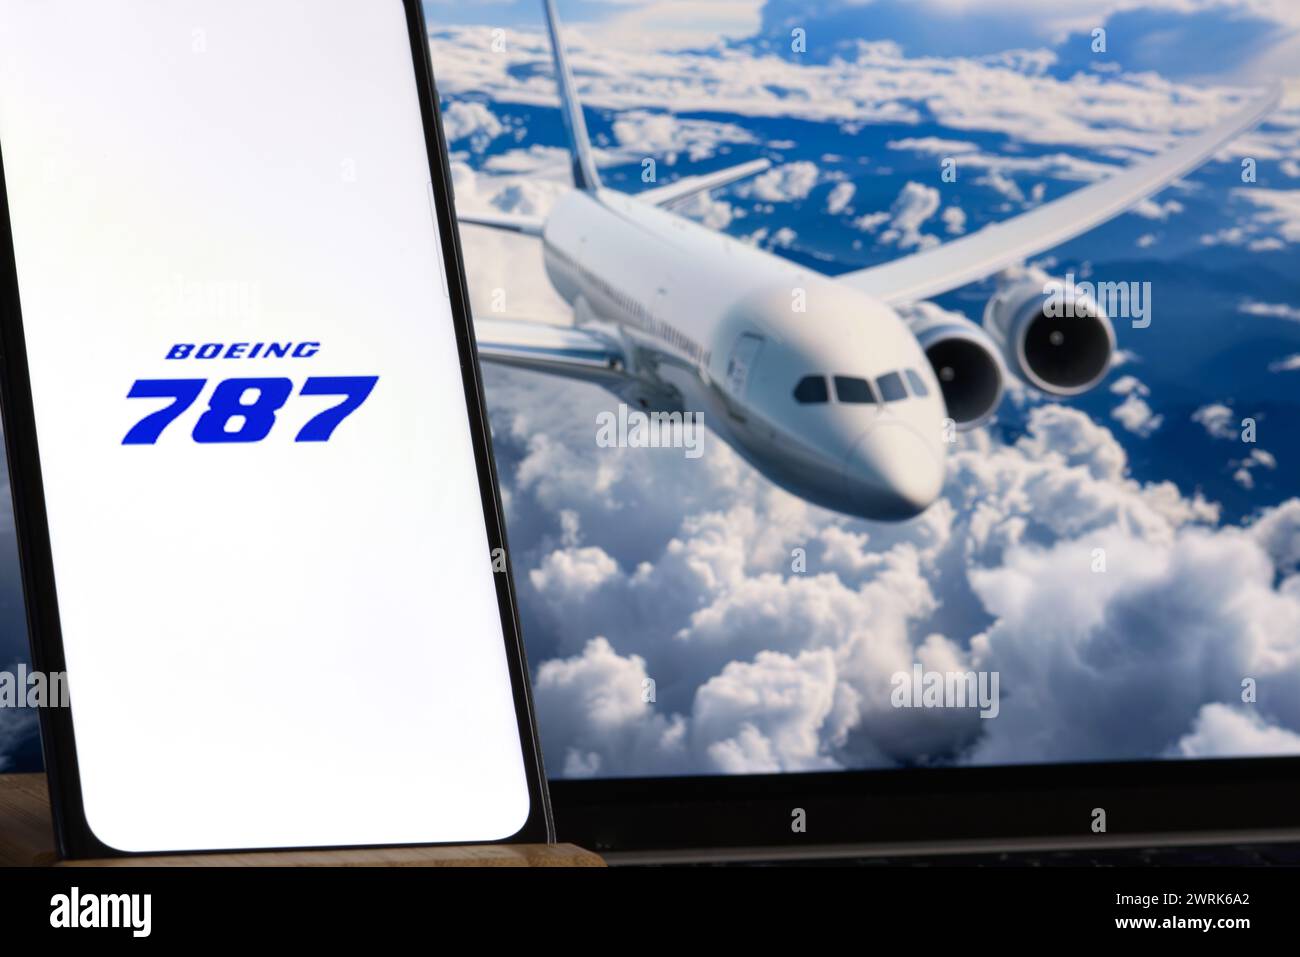 Boeing 787 logo is sharp in the foreground, while flying airplane is blurred in the background. Stock Photo